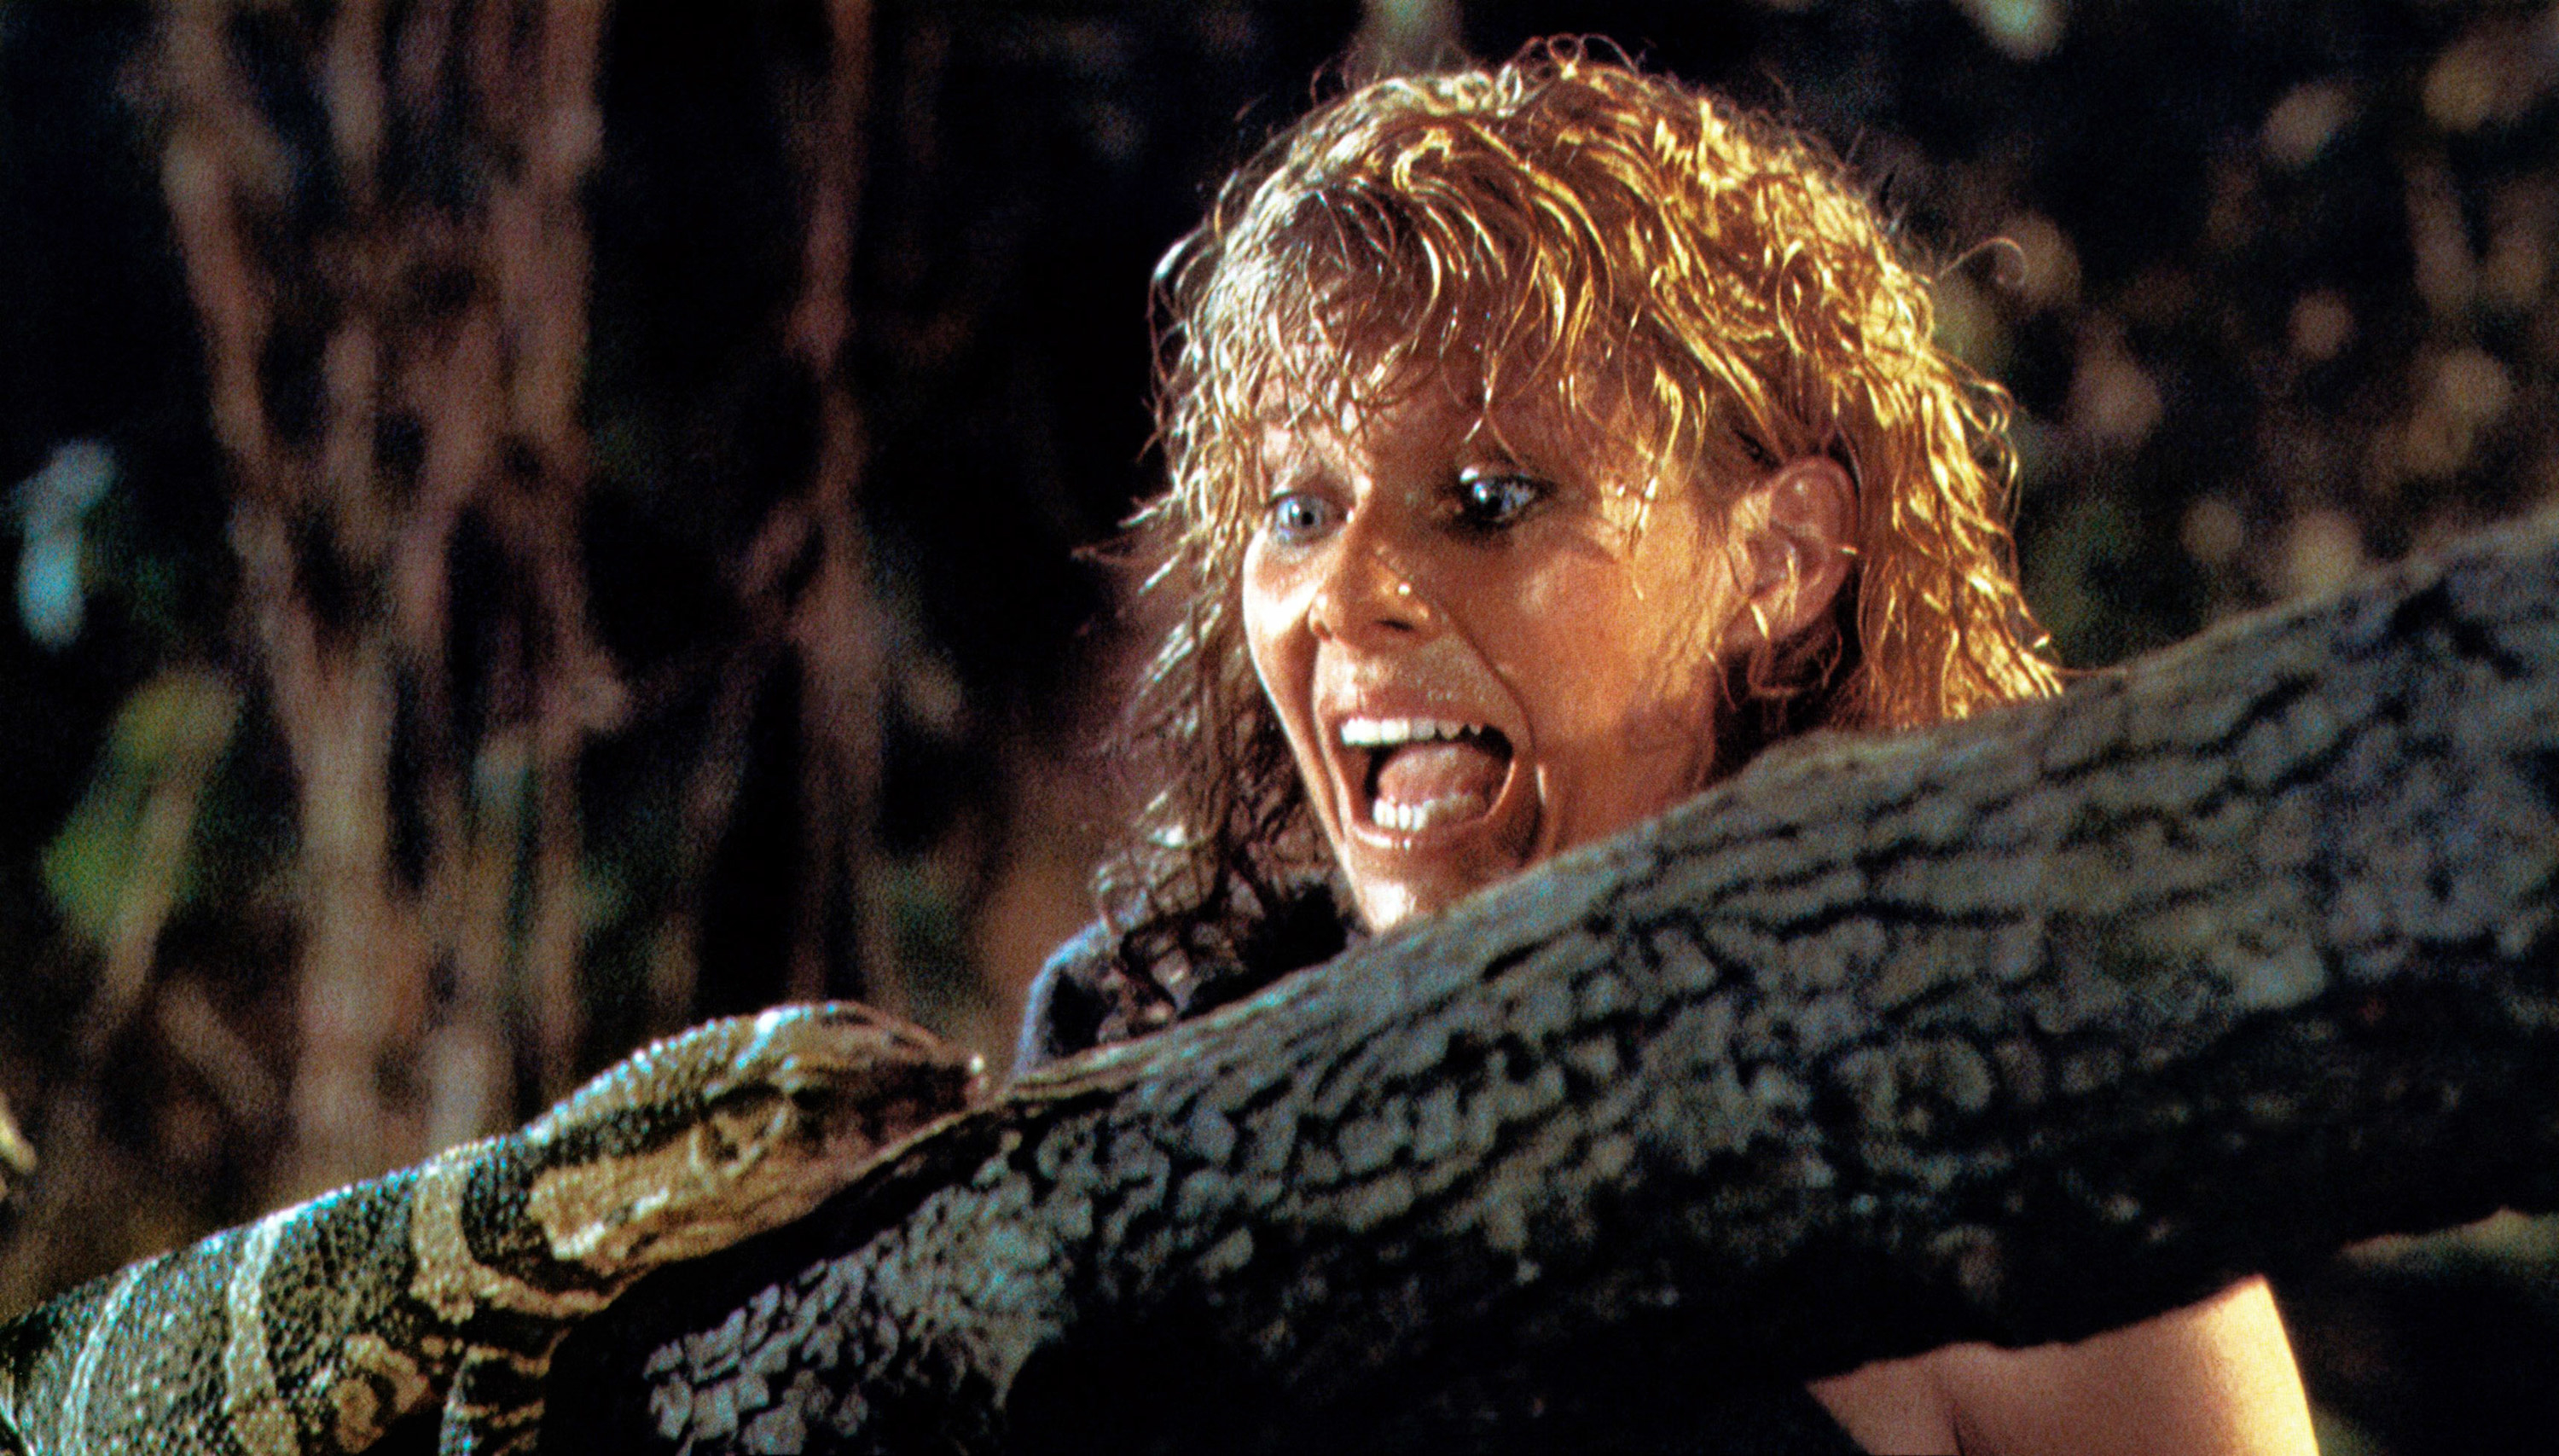 Kate Capshaw in &quot;Temple of Doom&quot; screams when she sees a snake